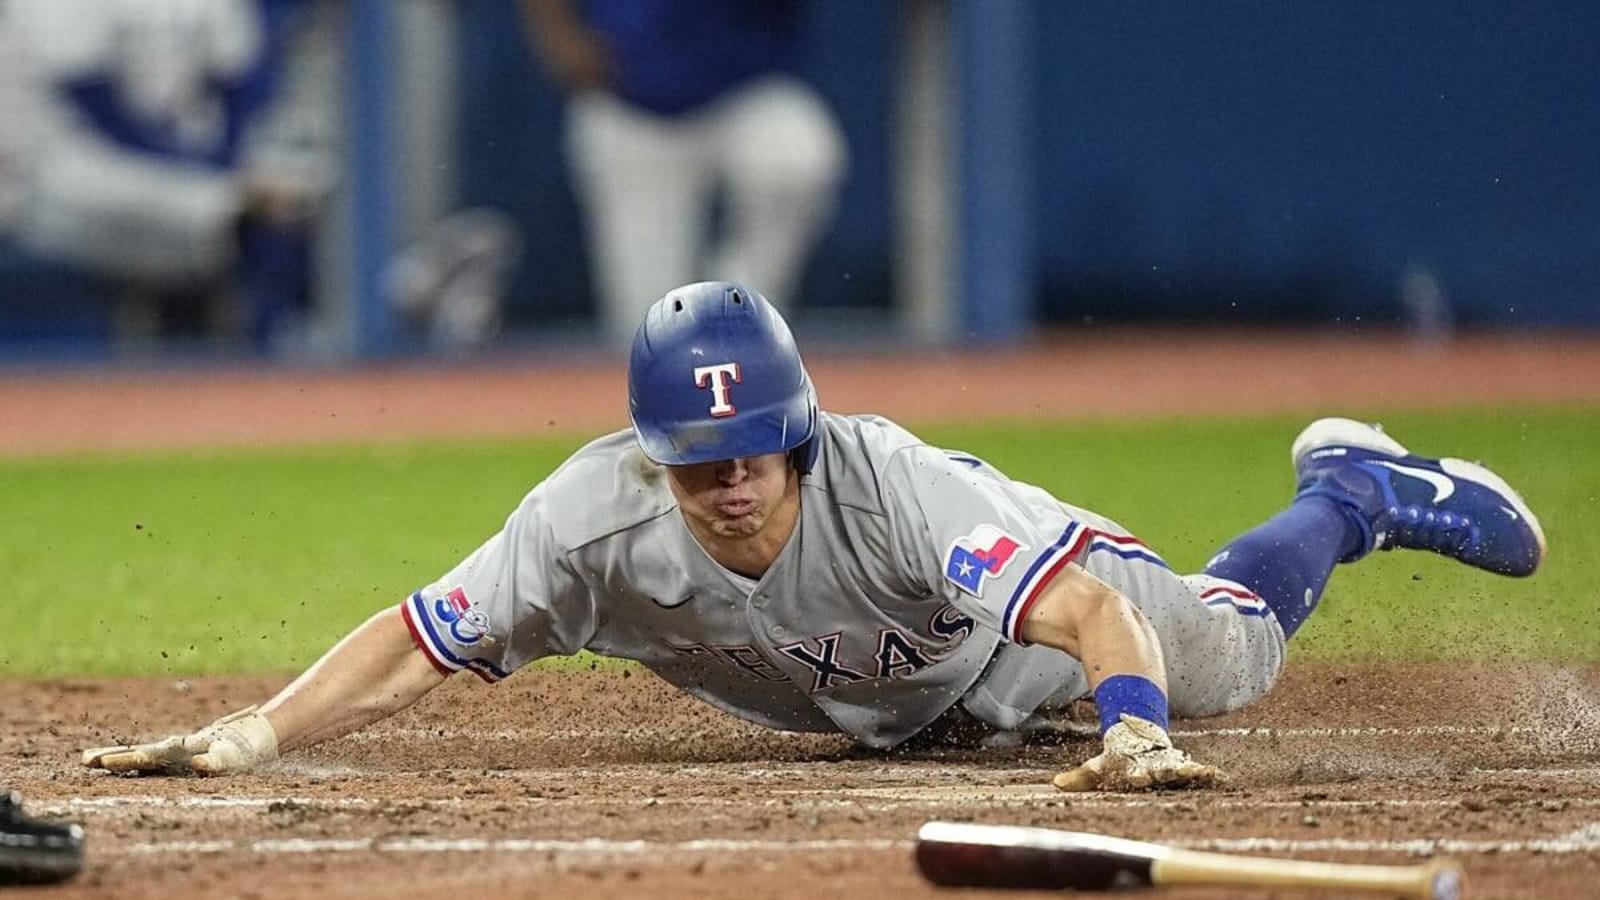 Rangers Trade Utility Player to Reds